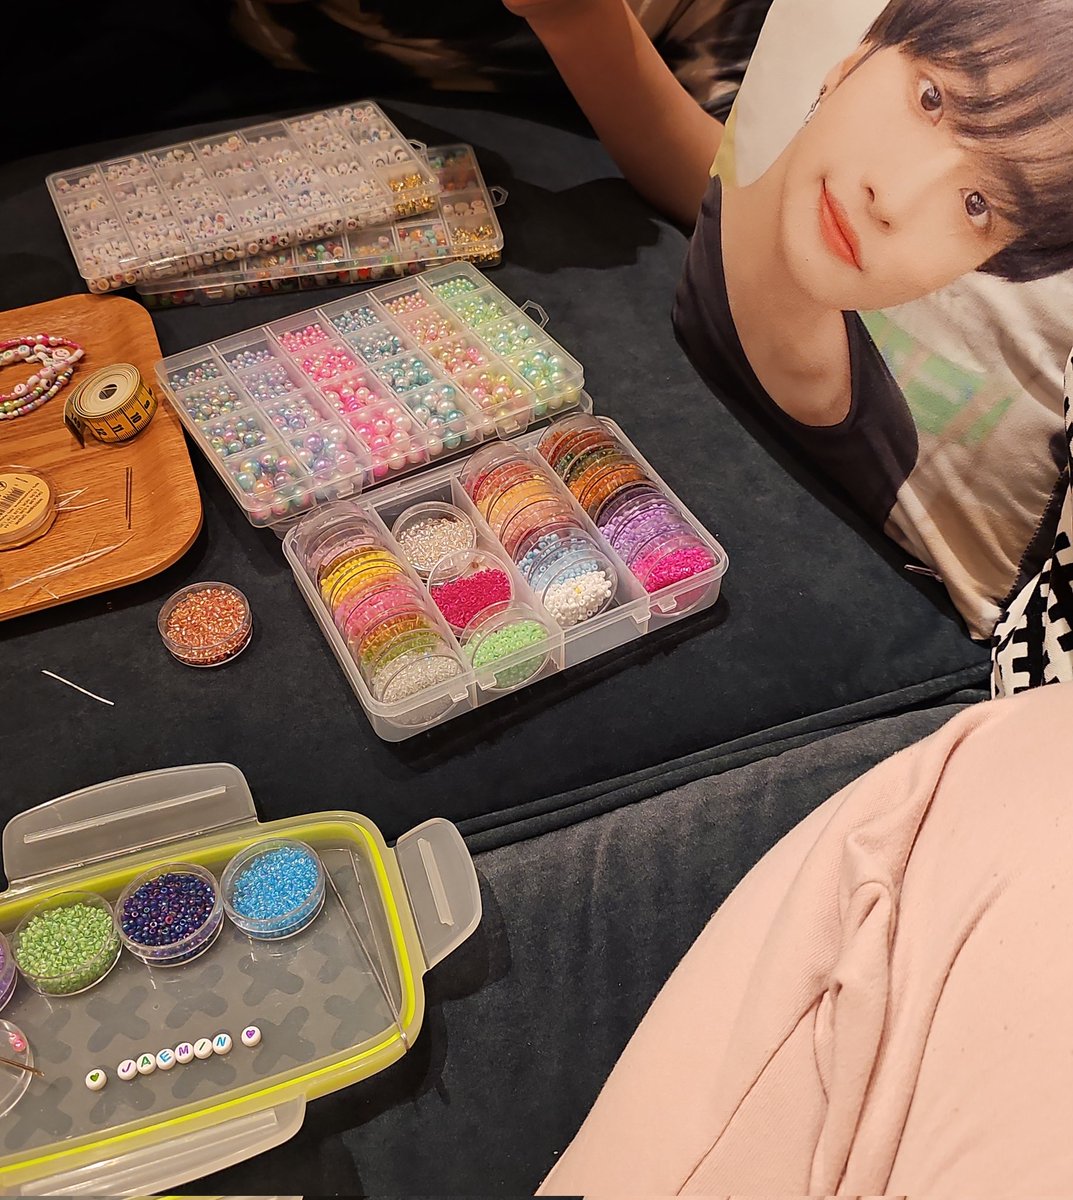 hwa is supervising the dreamies bracelet factory hehe